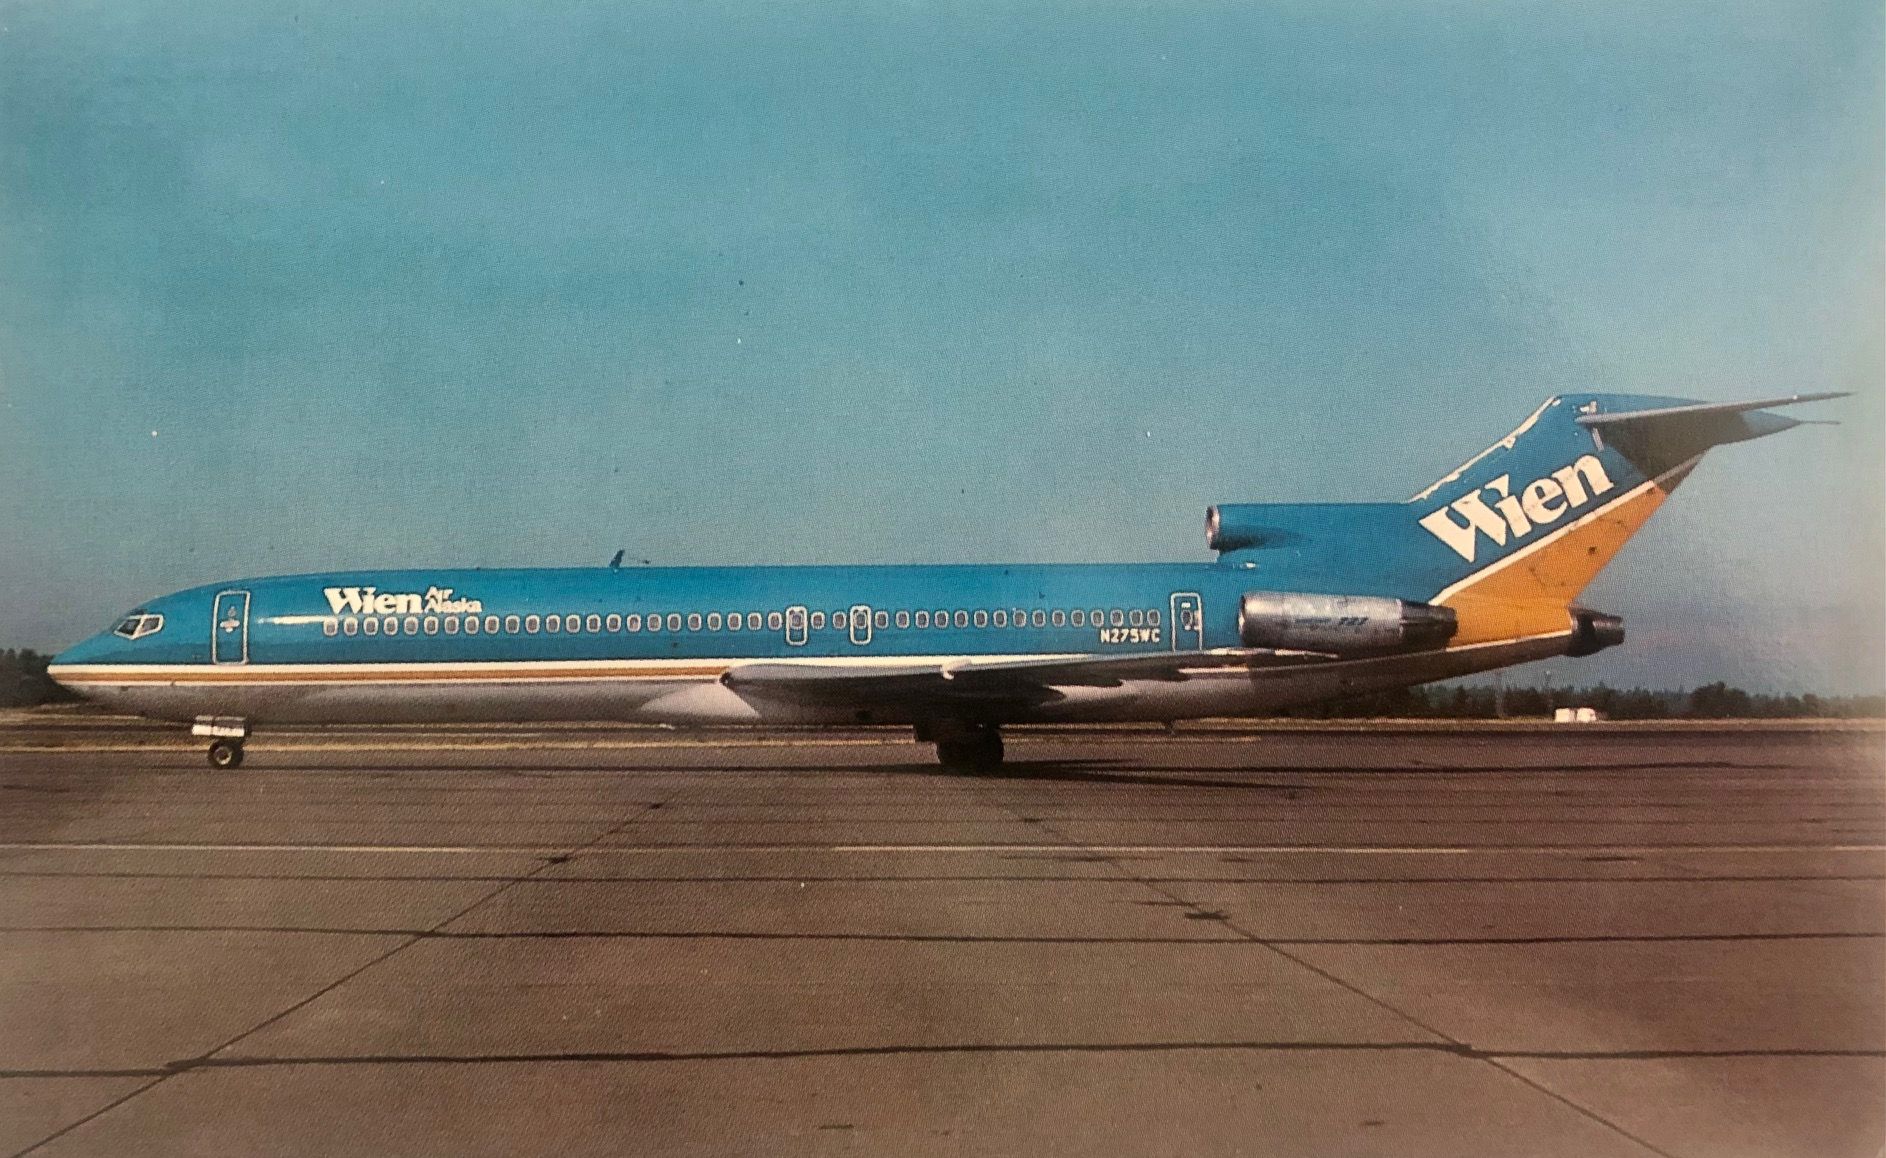 A blue Boeing 737 aircraft with white Wien Air Alaska lettering sits on a runway